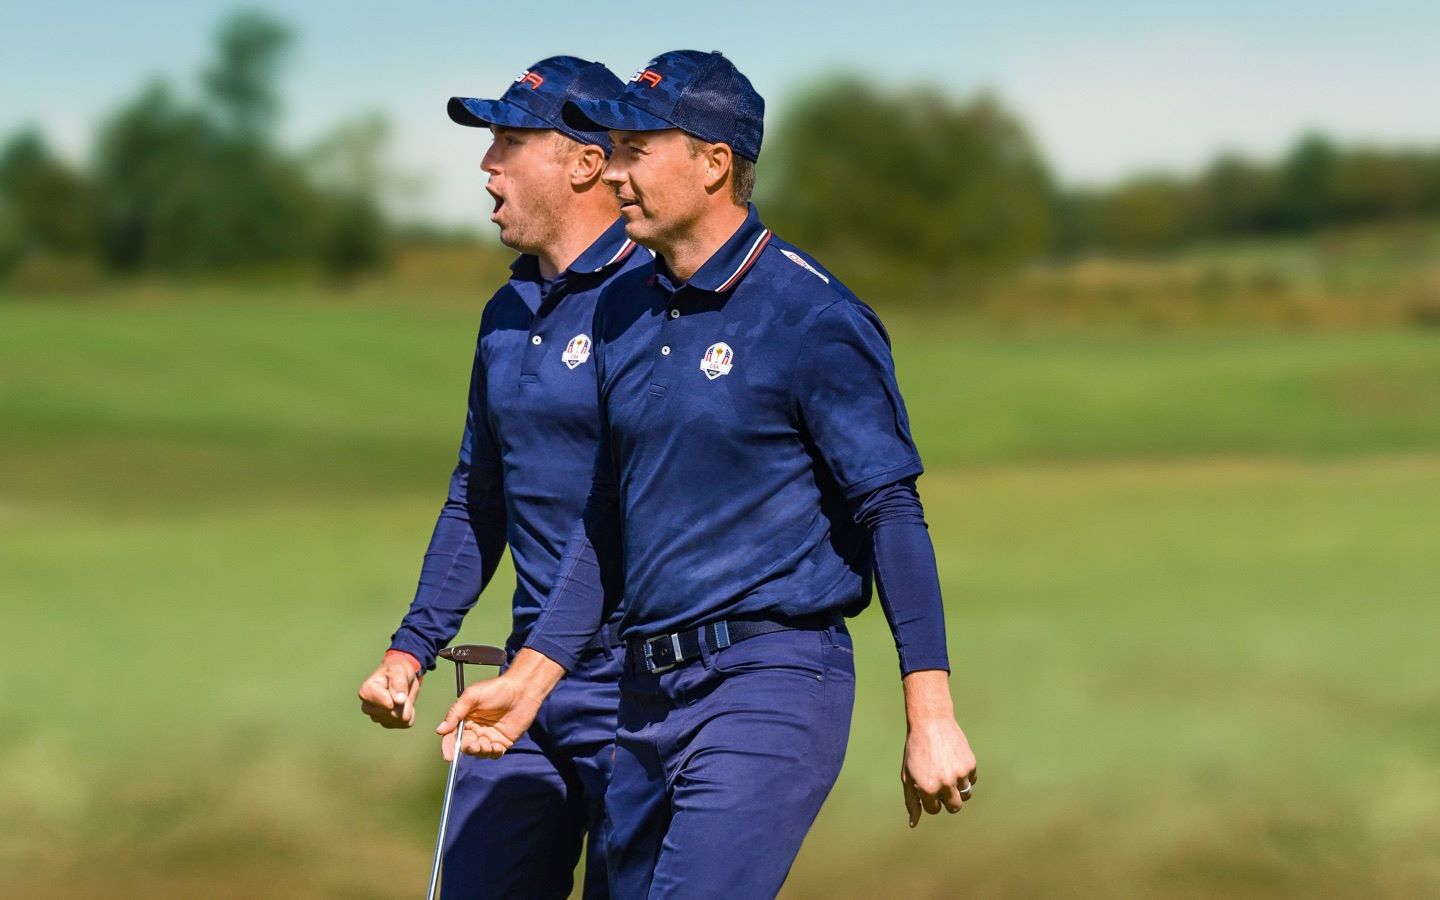 Golfers wearing blue walk the course during the Ryder Cup.